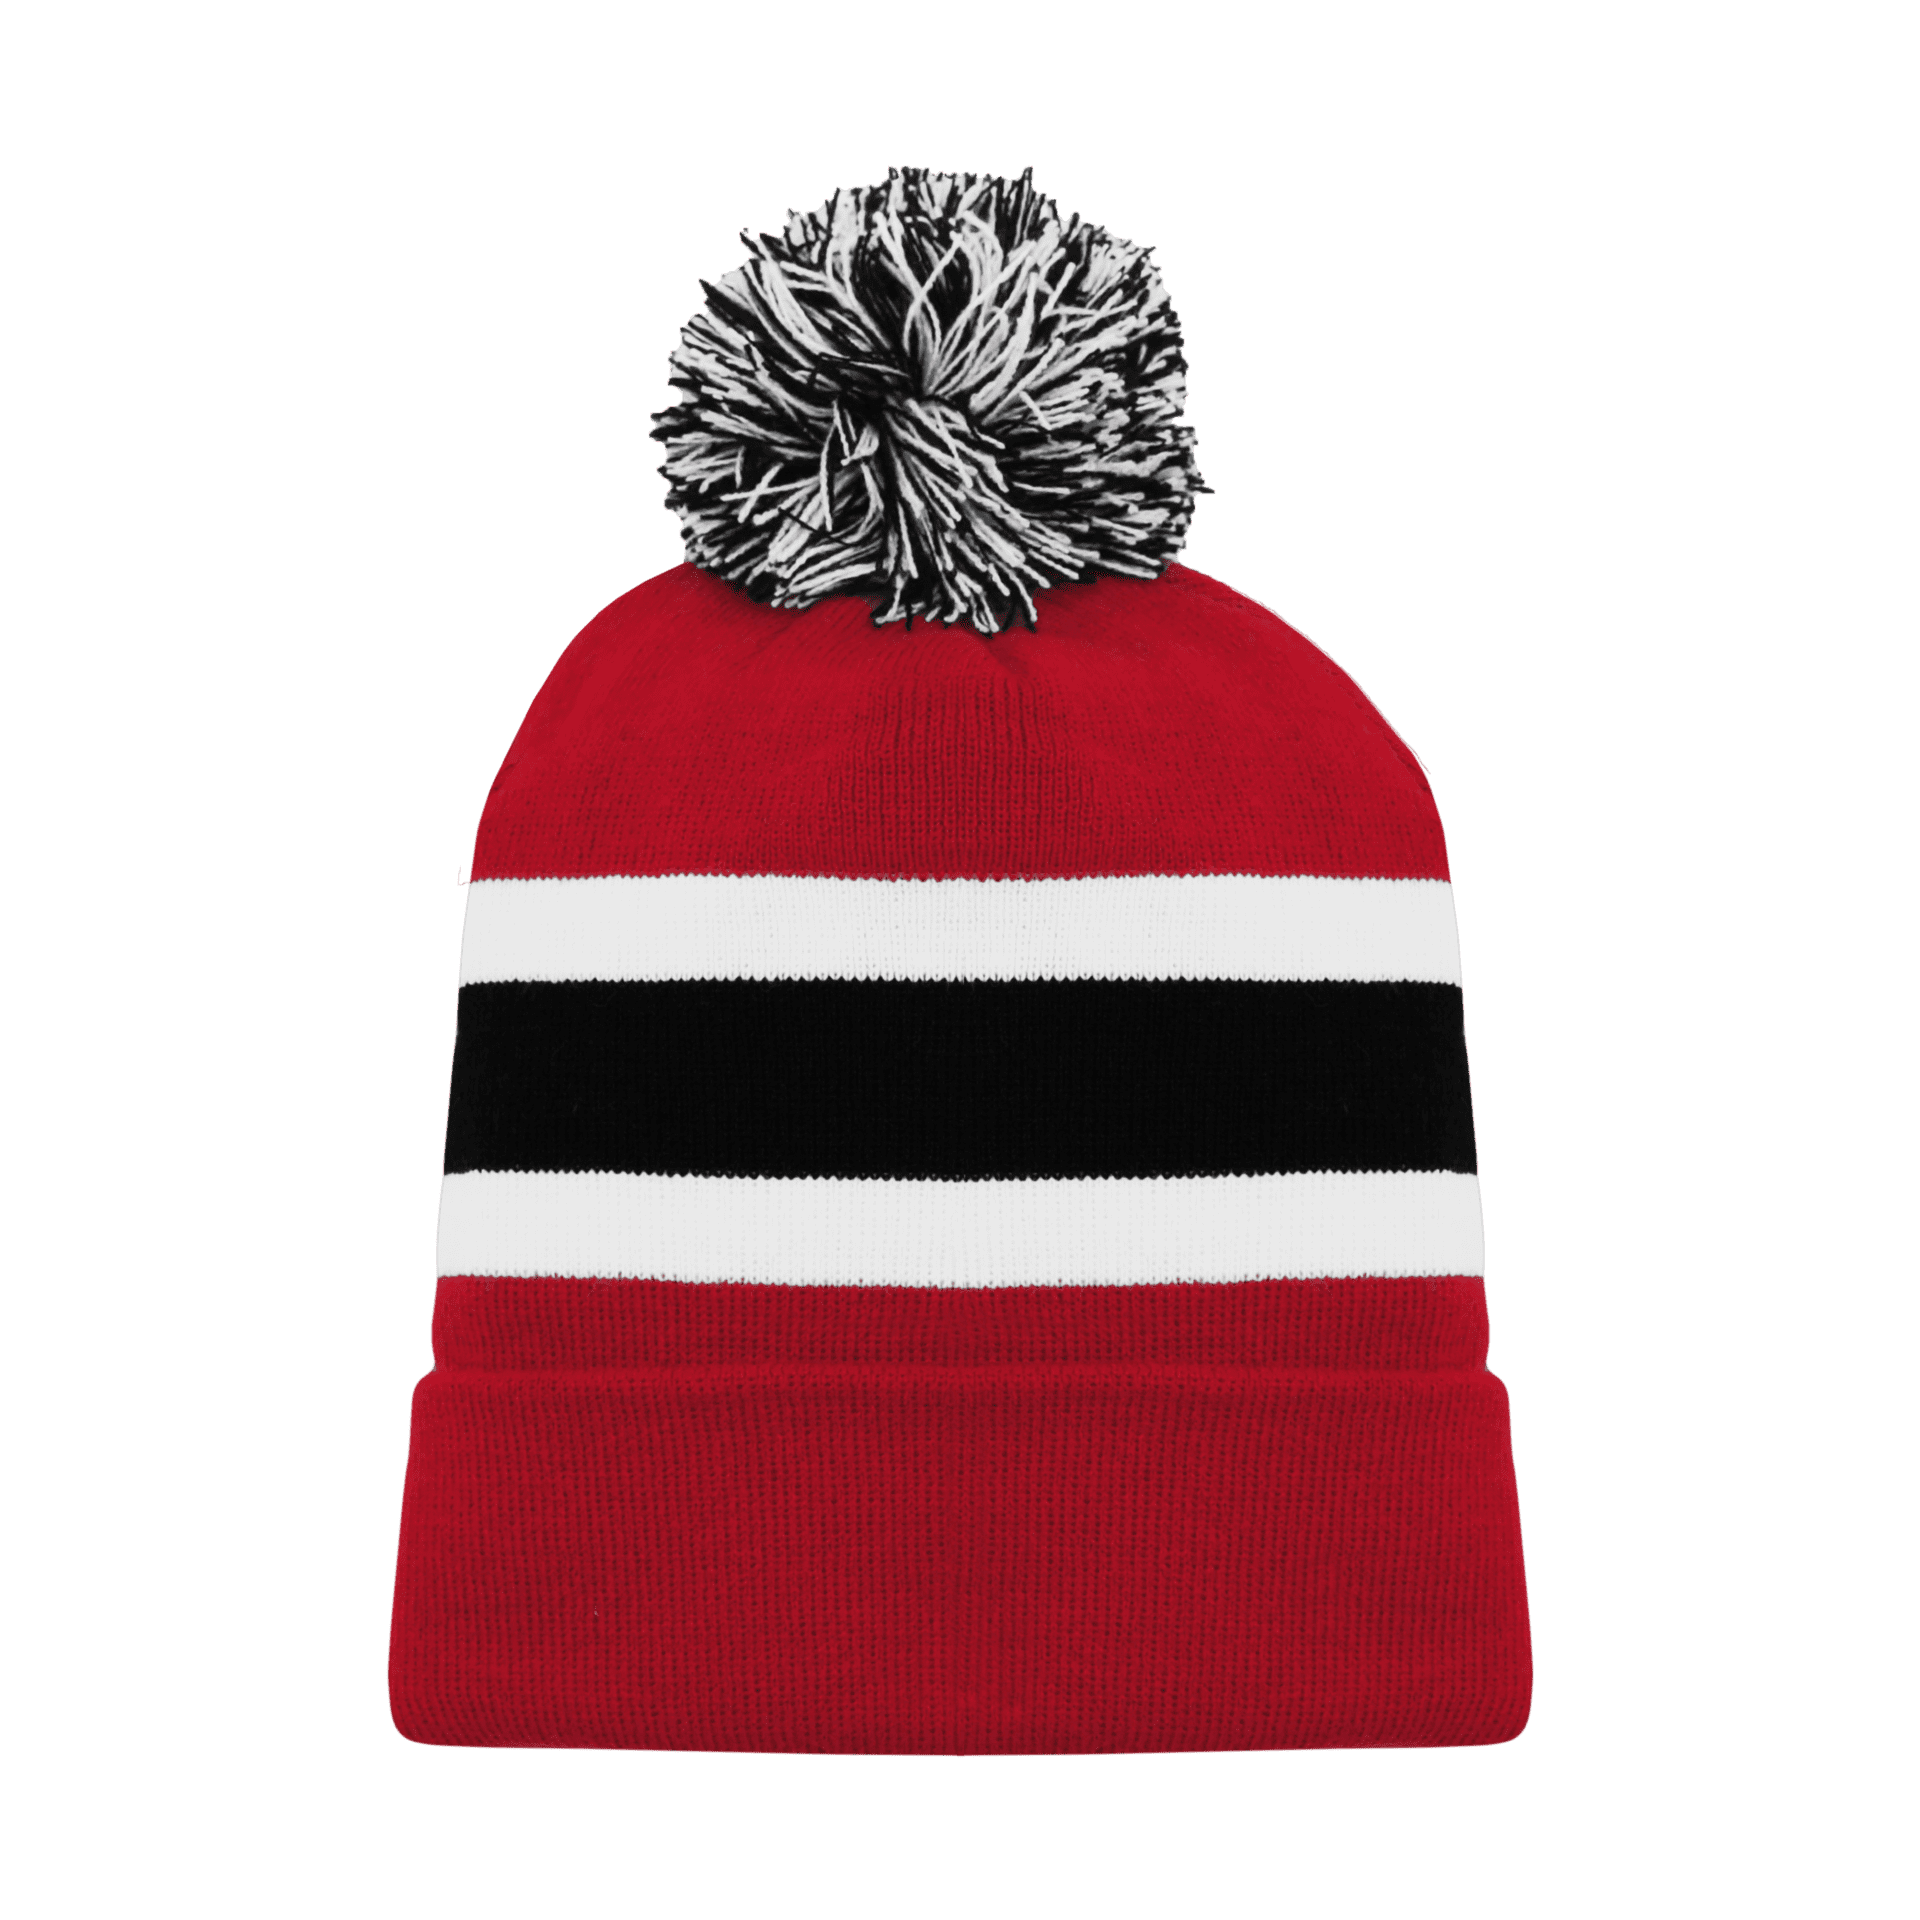 ATHLETIC KNIT HOCKEY TOQUE #A1830 New Jersey Red